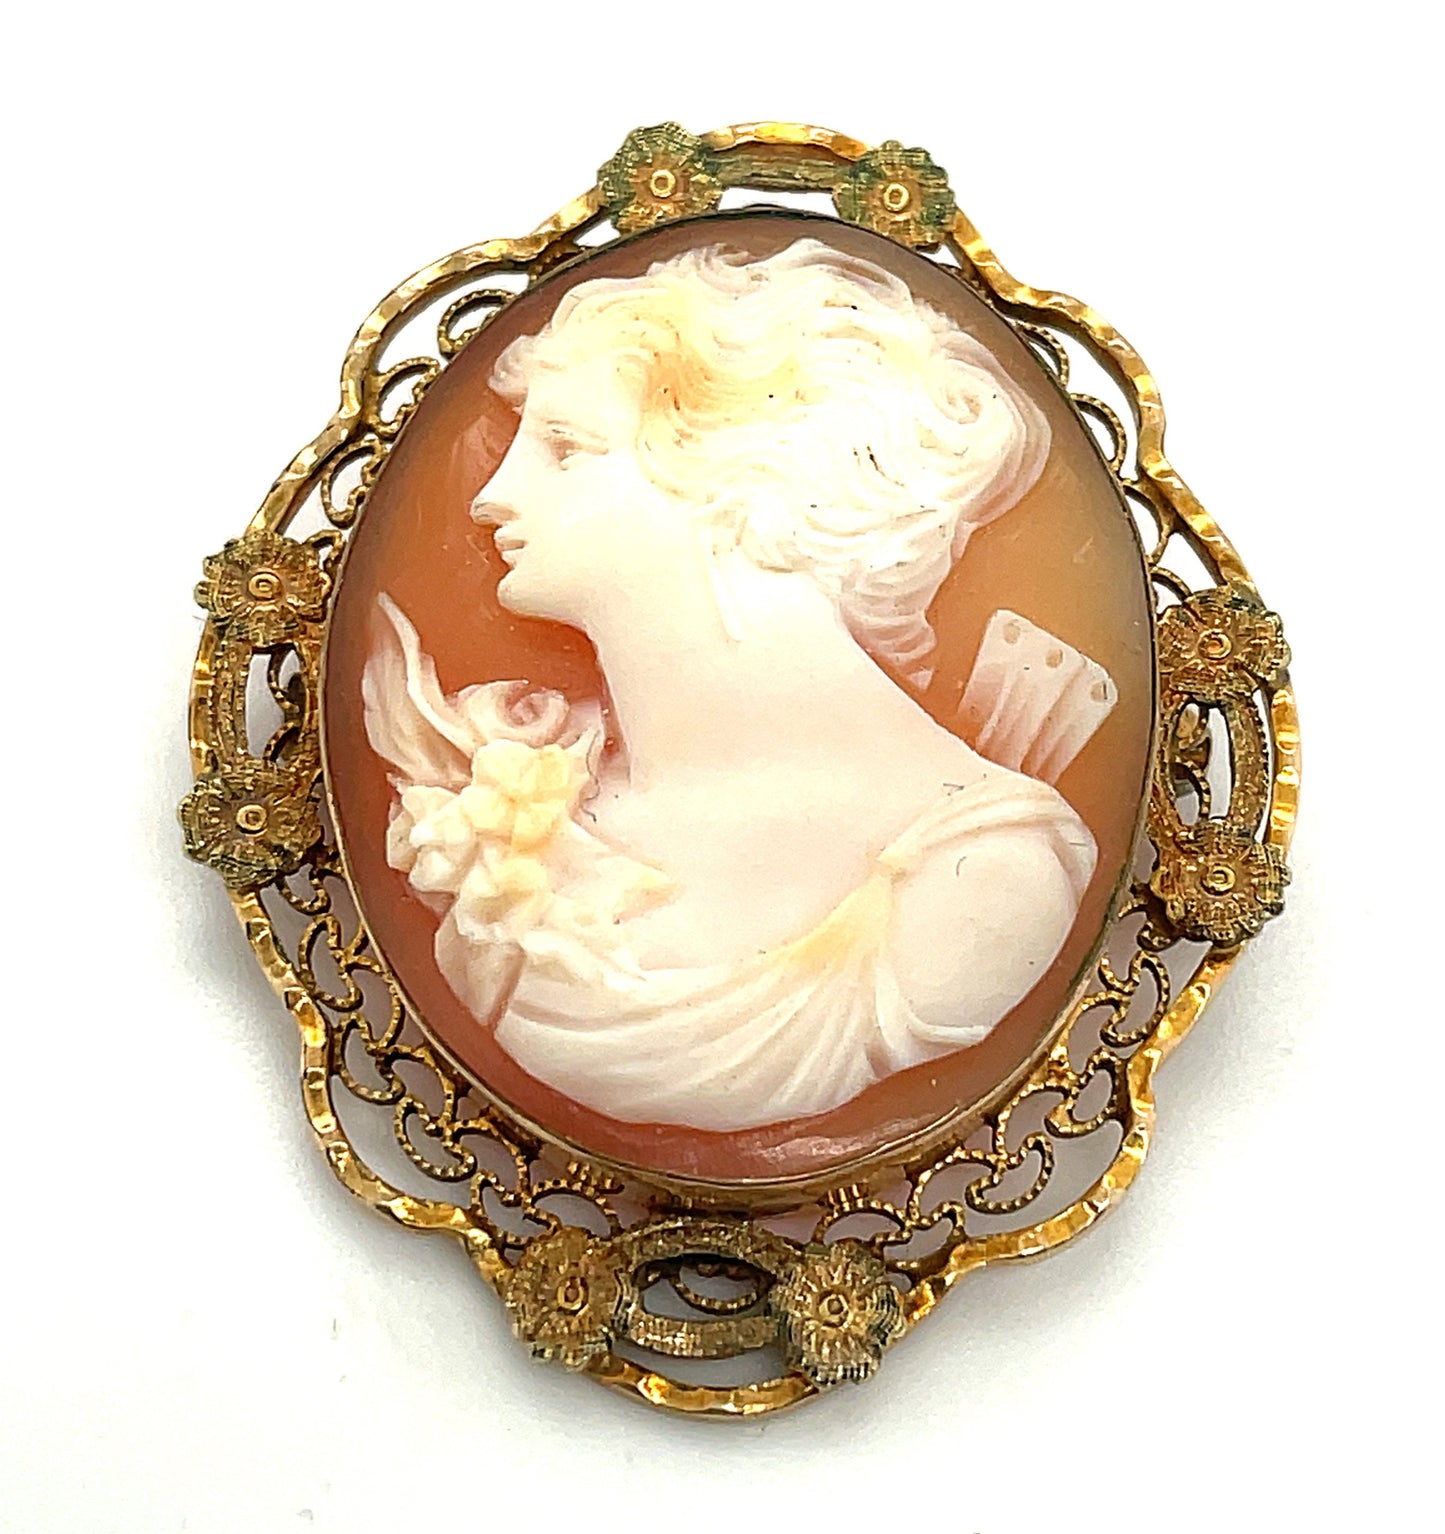 Antique Cameo 10k Yellow Gold AMCO Brooch Pin 6.7 Grams 1.5" x 1.25"